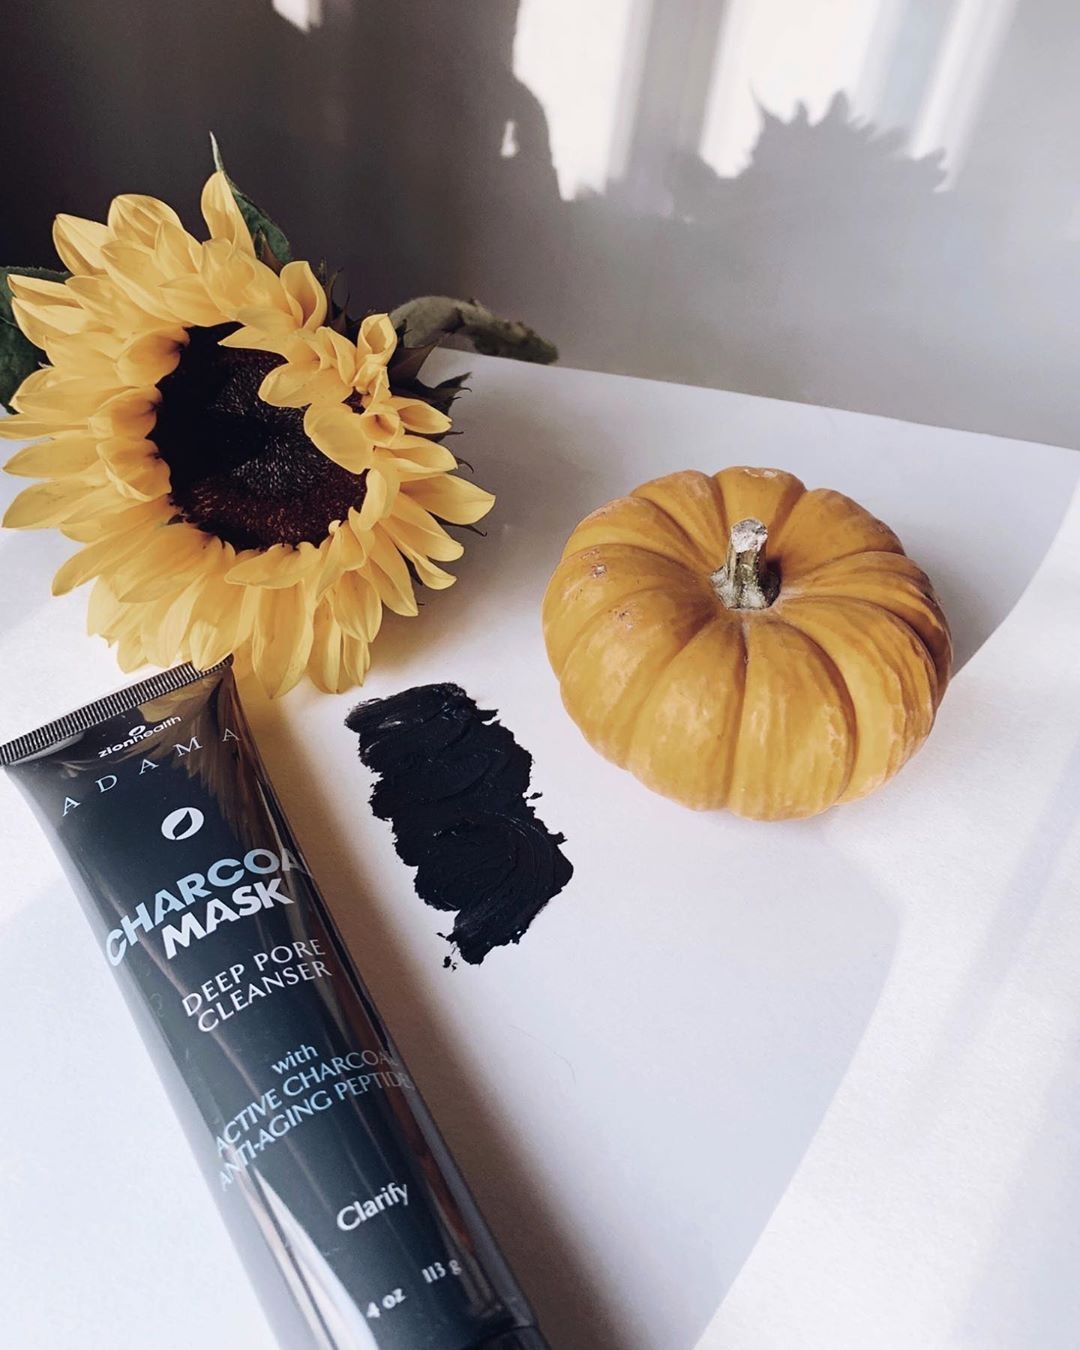 zion health - It’s almost that time of the year!🍁 Refresh and renew deep down to your pores with our 𝐂𝐡𝐚𝐫𝐜𝐨𝐚𝐥 𝐅𝐚𝐜𝐞 𝐌𝐚𝐬𝐤 💆 for a new, clean (poreless 💎) beginning. ⁣
📸: @save.my.skin
#zionhealth #heali...